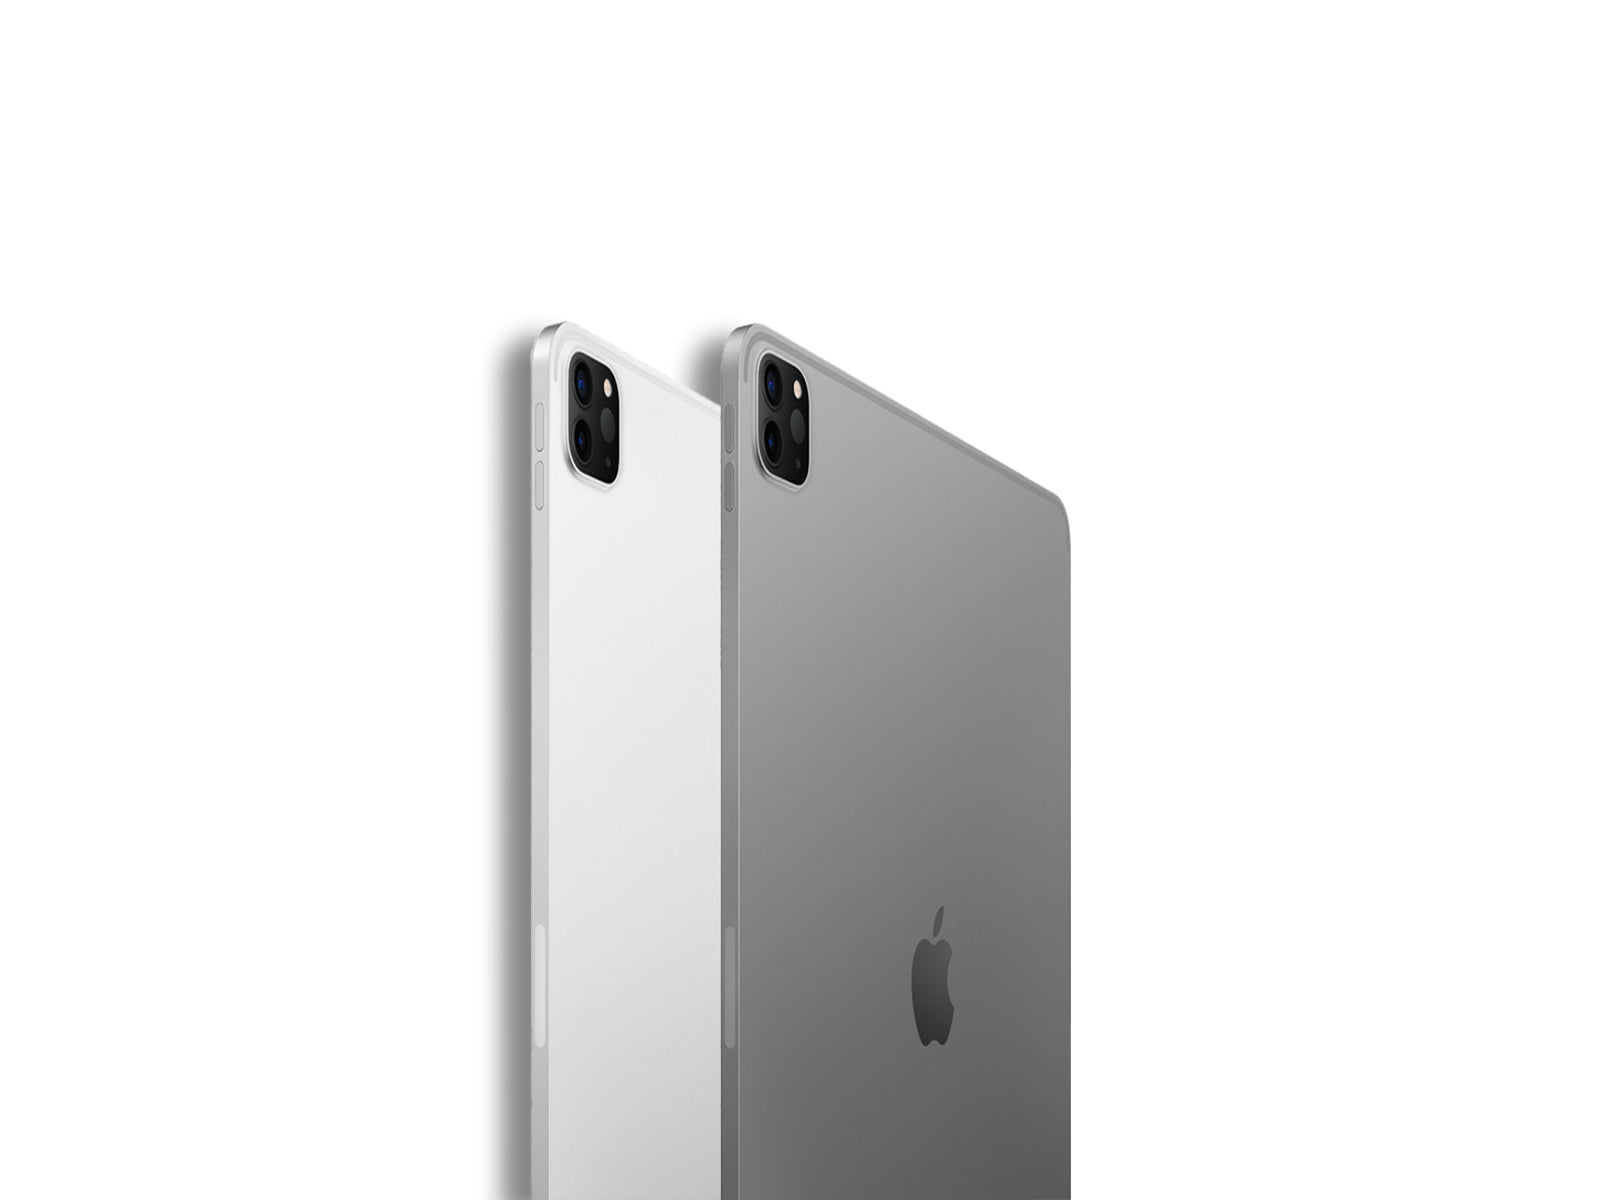 iPad Pro 6th Gen In Colours Silver And Space Grey Back